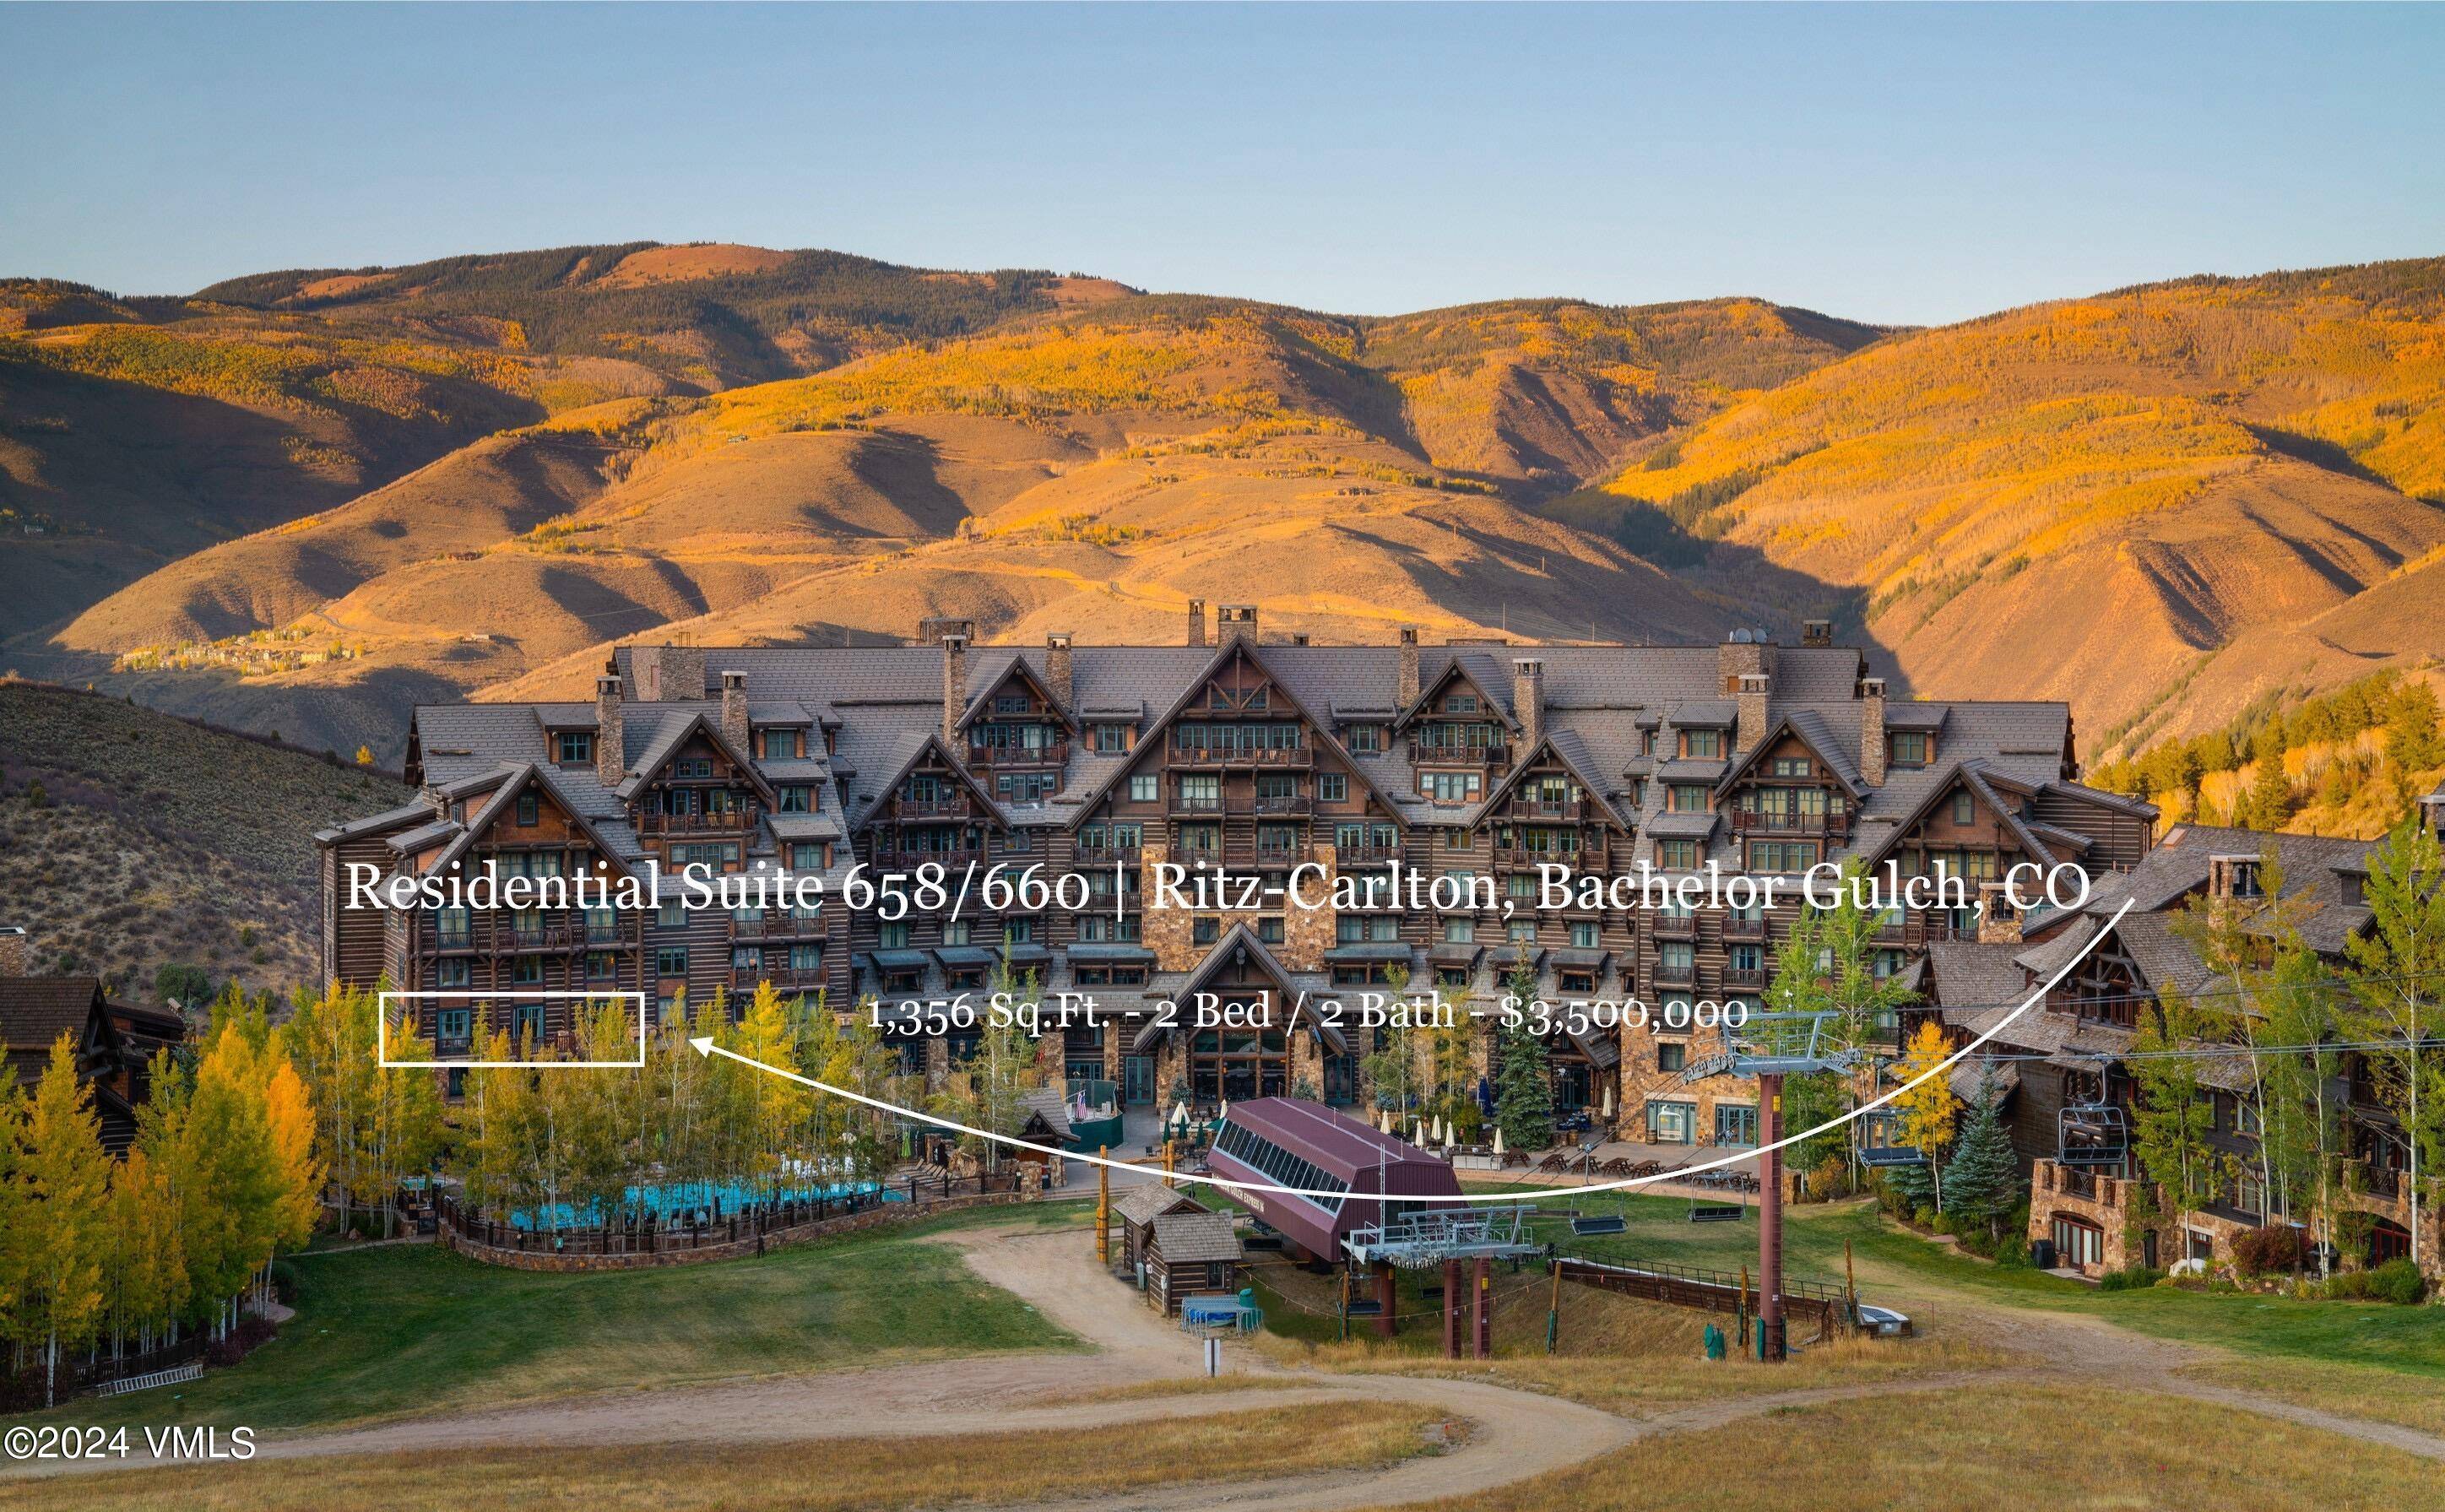 Enjoy worldwide advantages of ownership at the ski in ski out Ritz Carlton in Bachelor Gulch, Colorado.